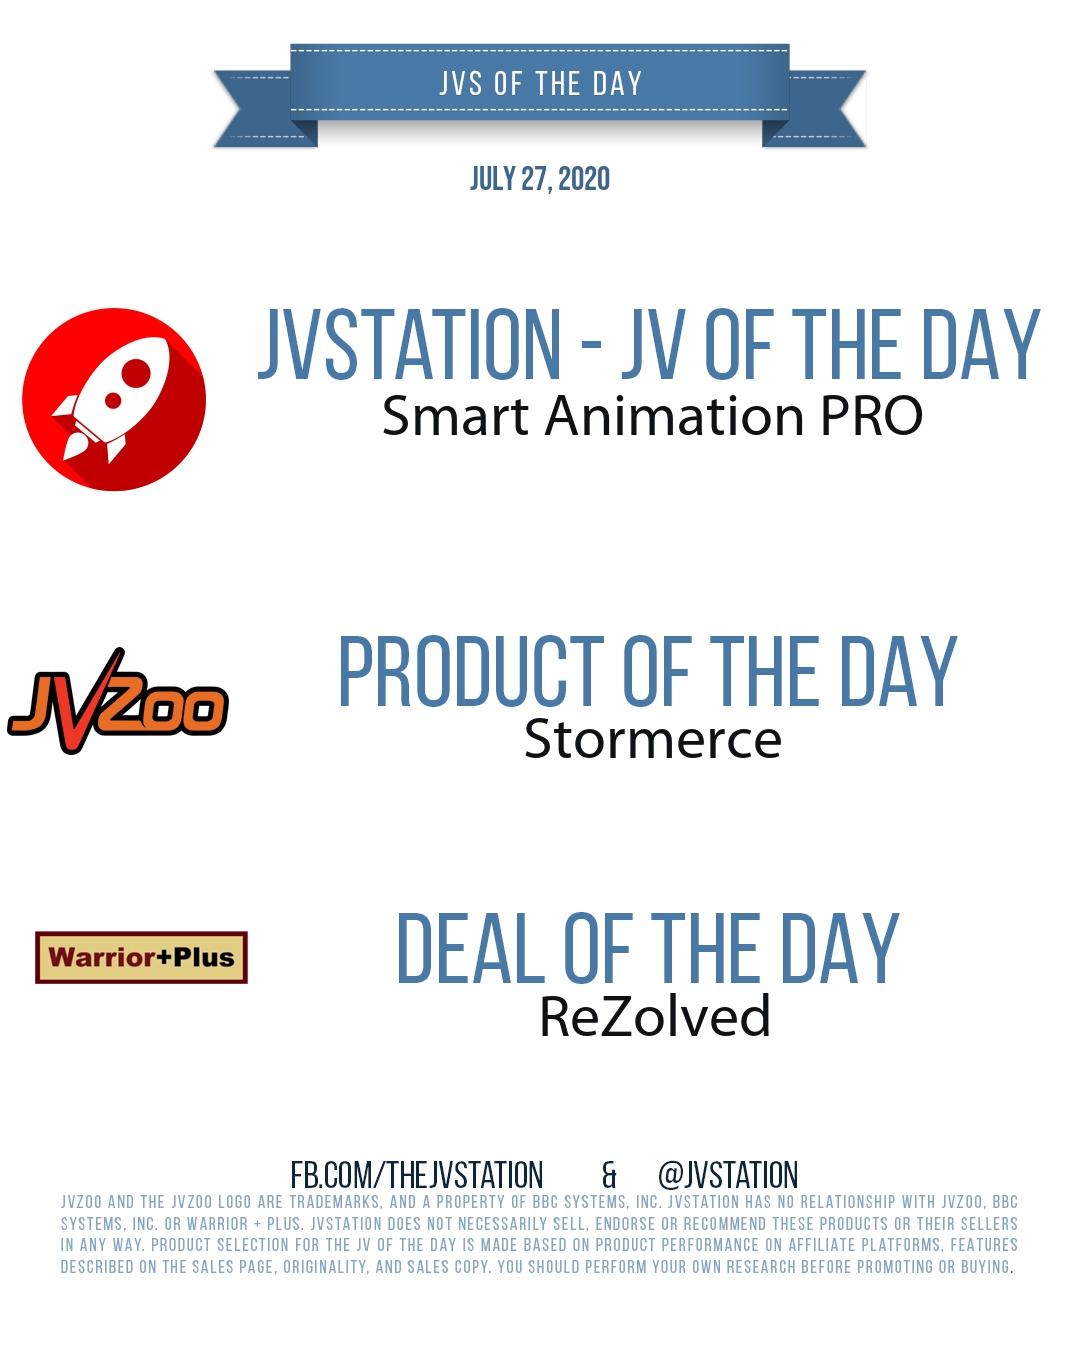 JVs of the day - July 27, 2020